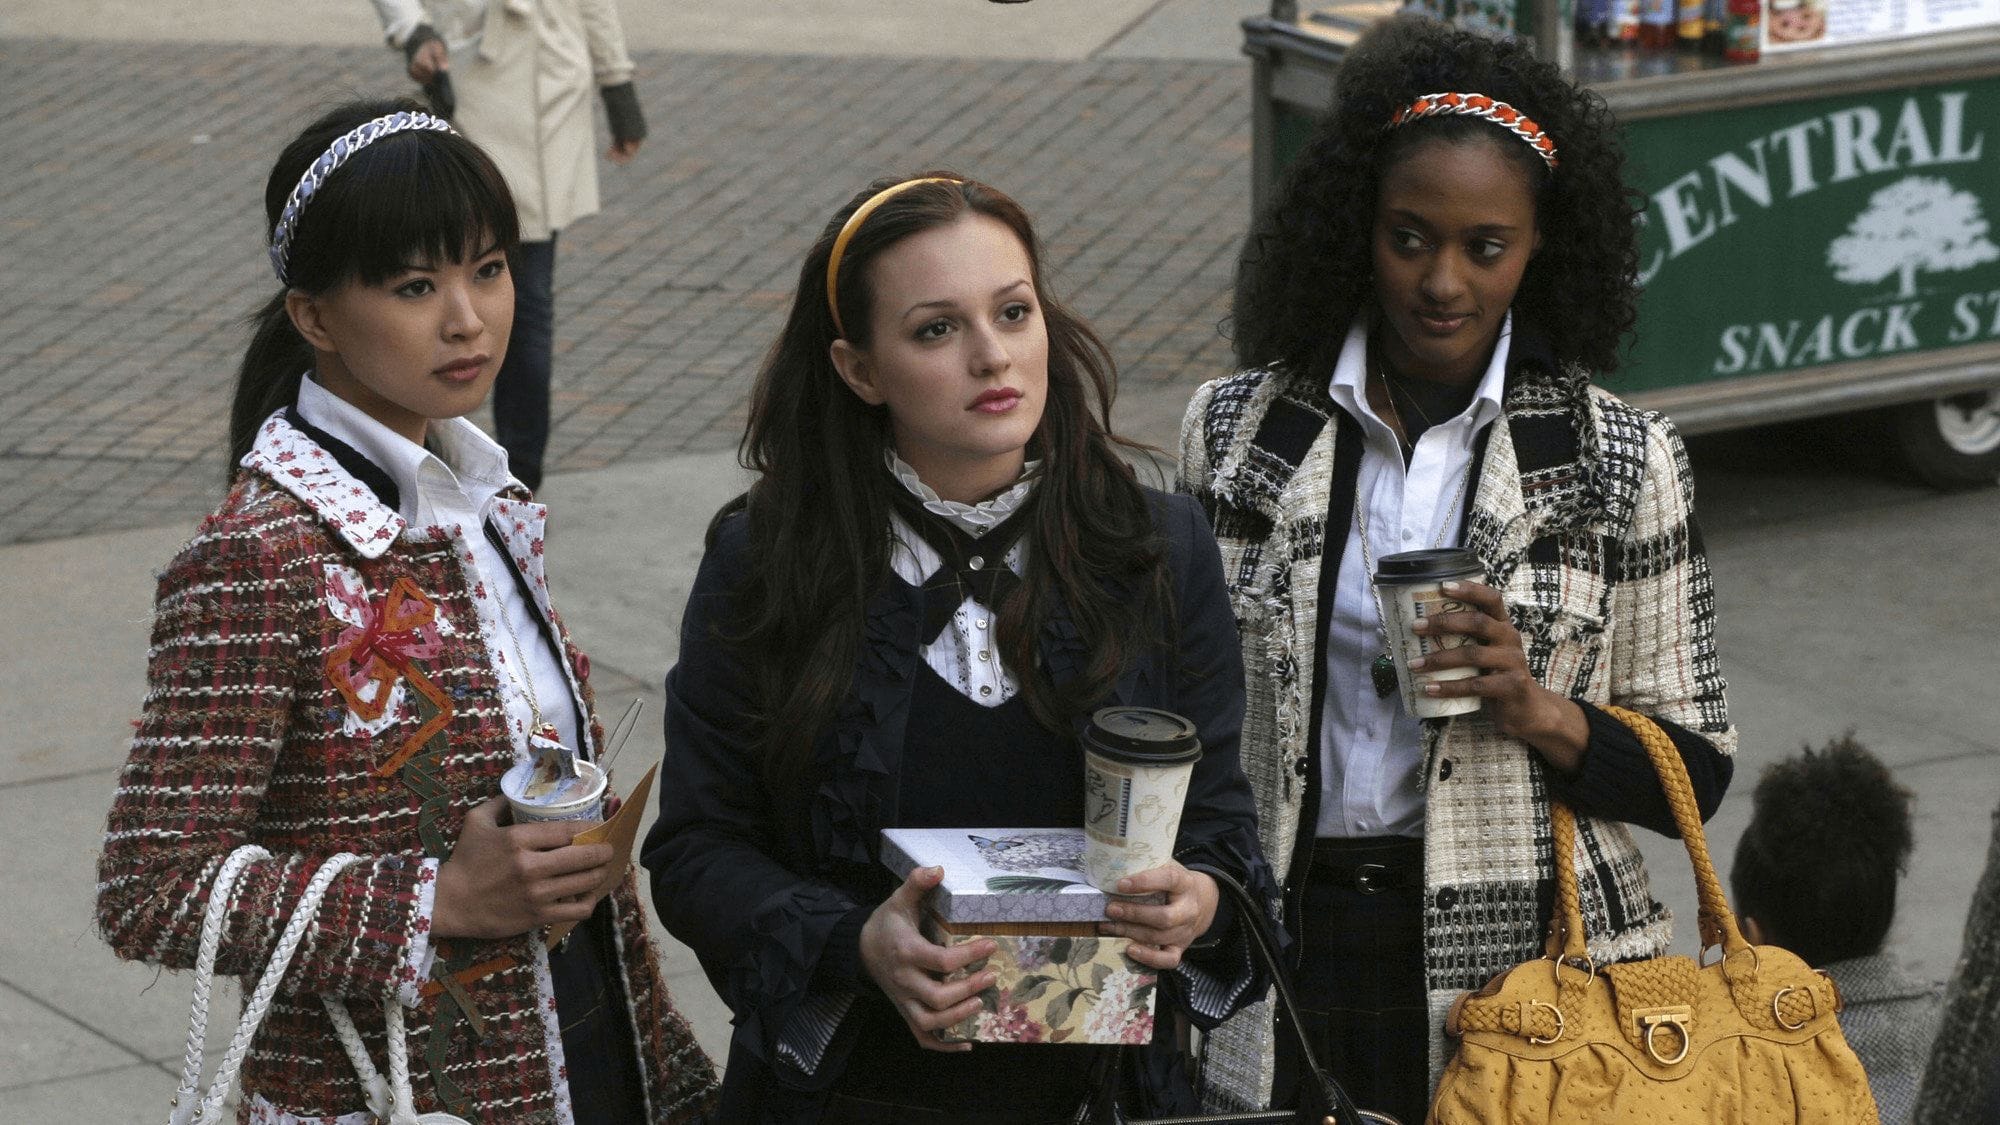 8 Hints You Missed About Who Gossip Girl Was